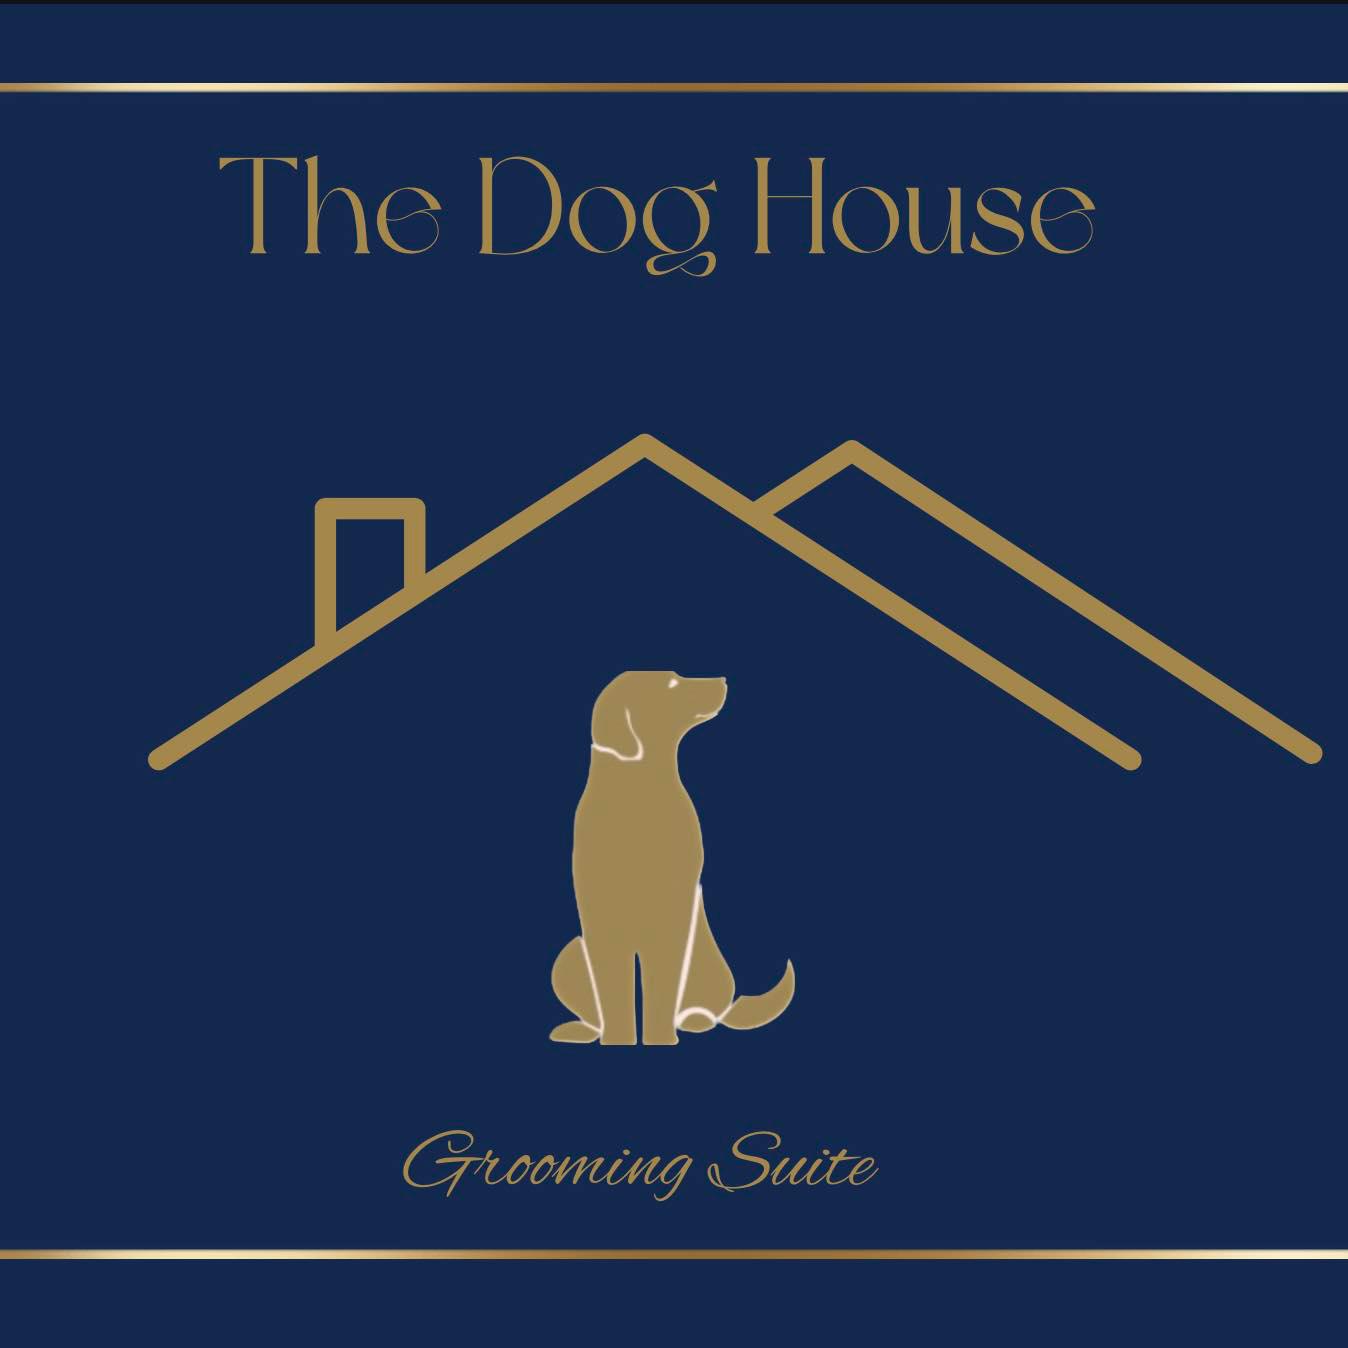 The Dog House Grooming Suite - Dunstable, Bedfordshire LU6 3LJ - 07517 413668 | ShowMeLocal.com